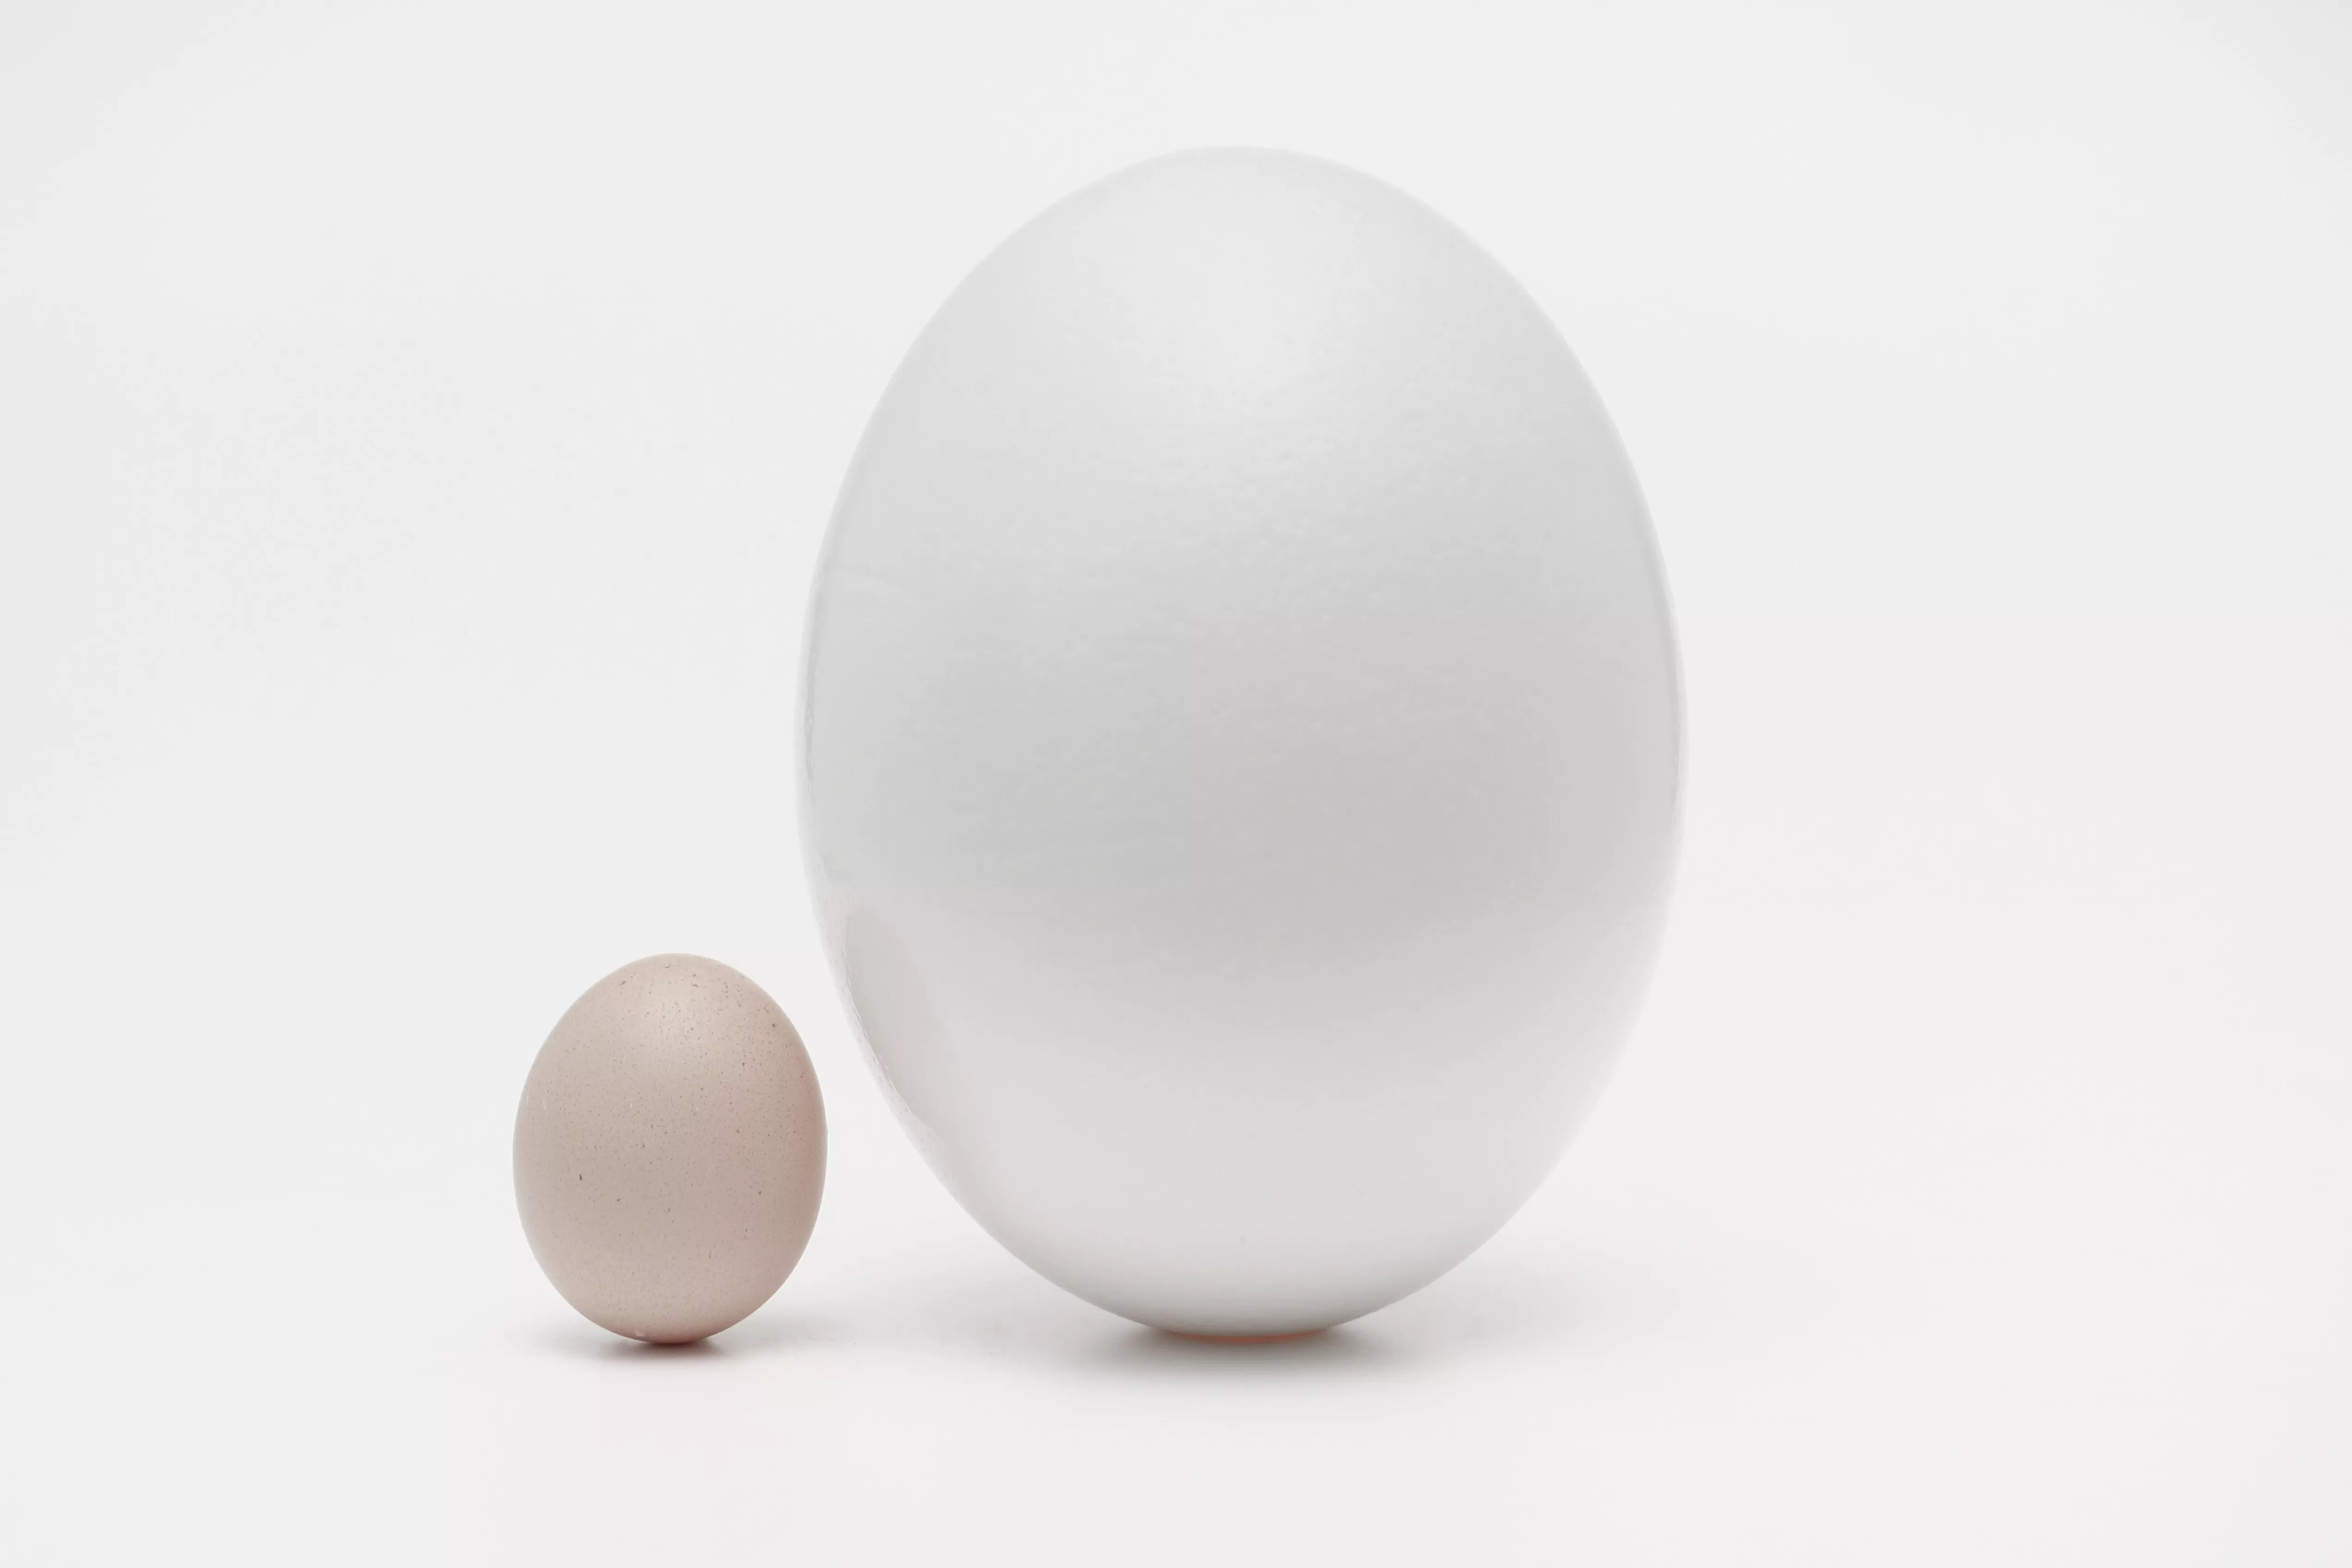 One Big Egg And One Small Egg